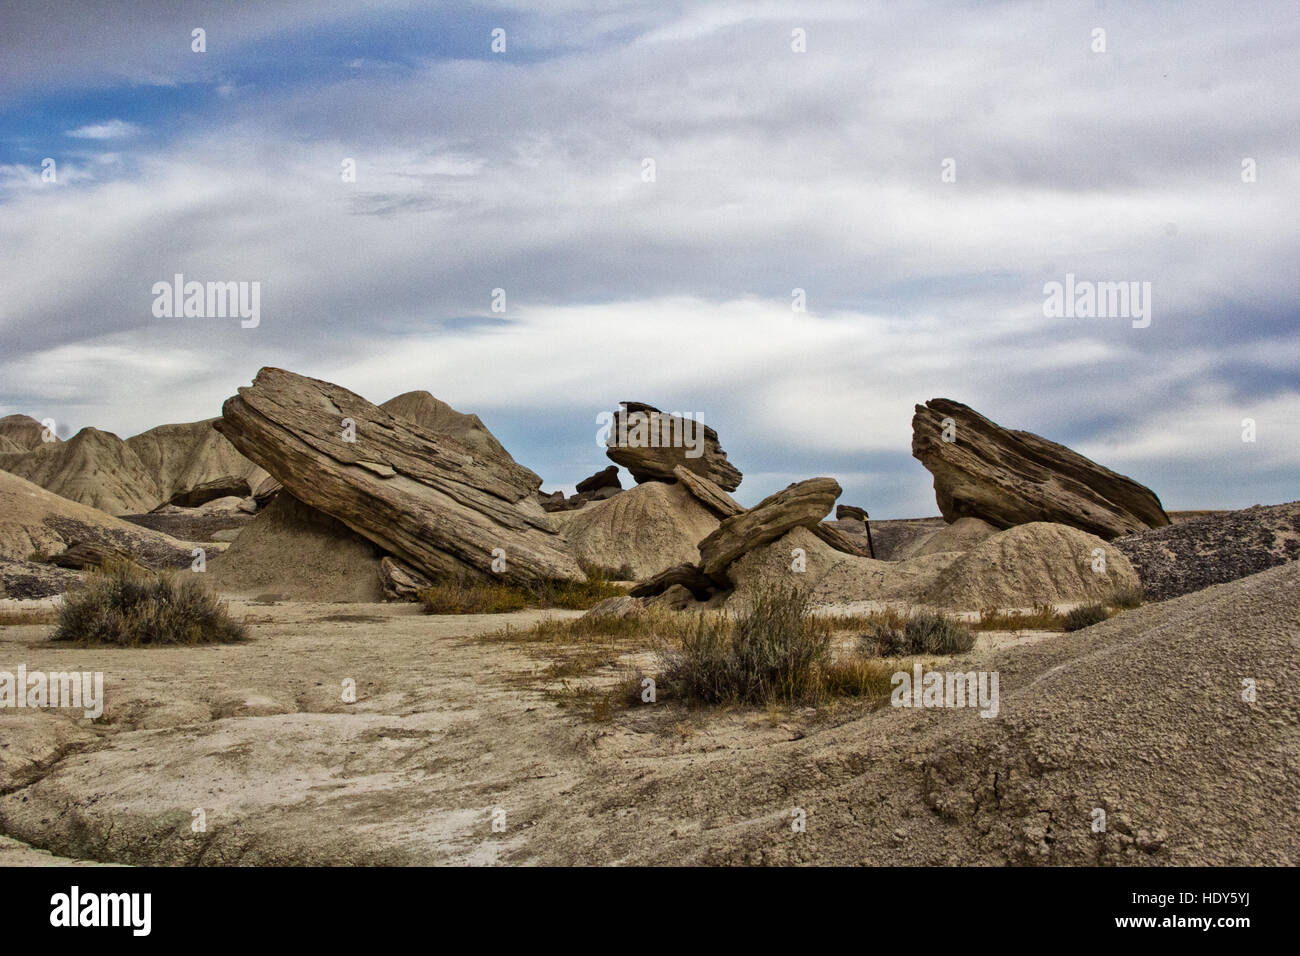 Follow the path to the badlands landscape past these fallen rock formations that once resembled toadstools in Toadstool Park Stock Photo